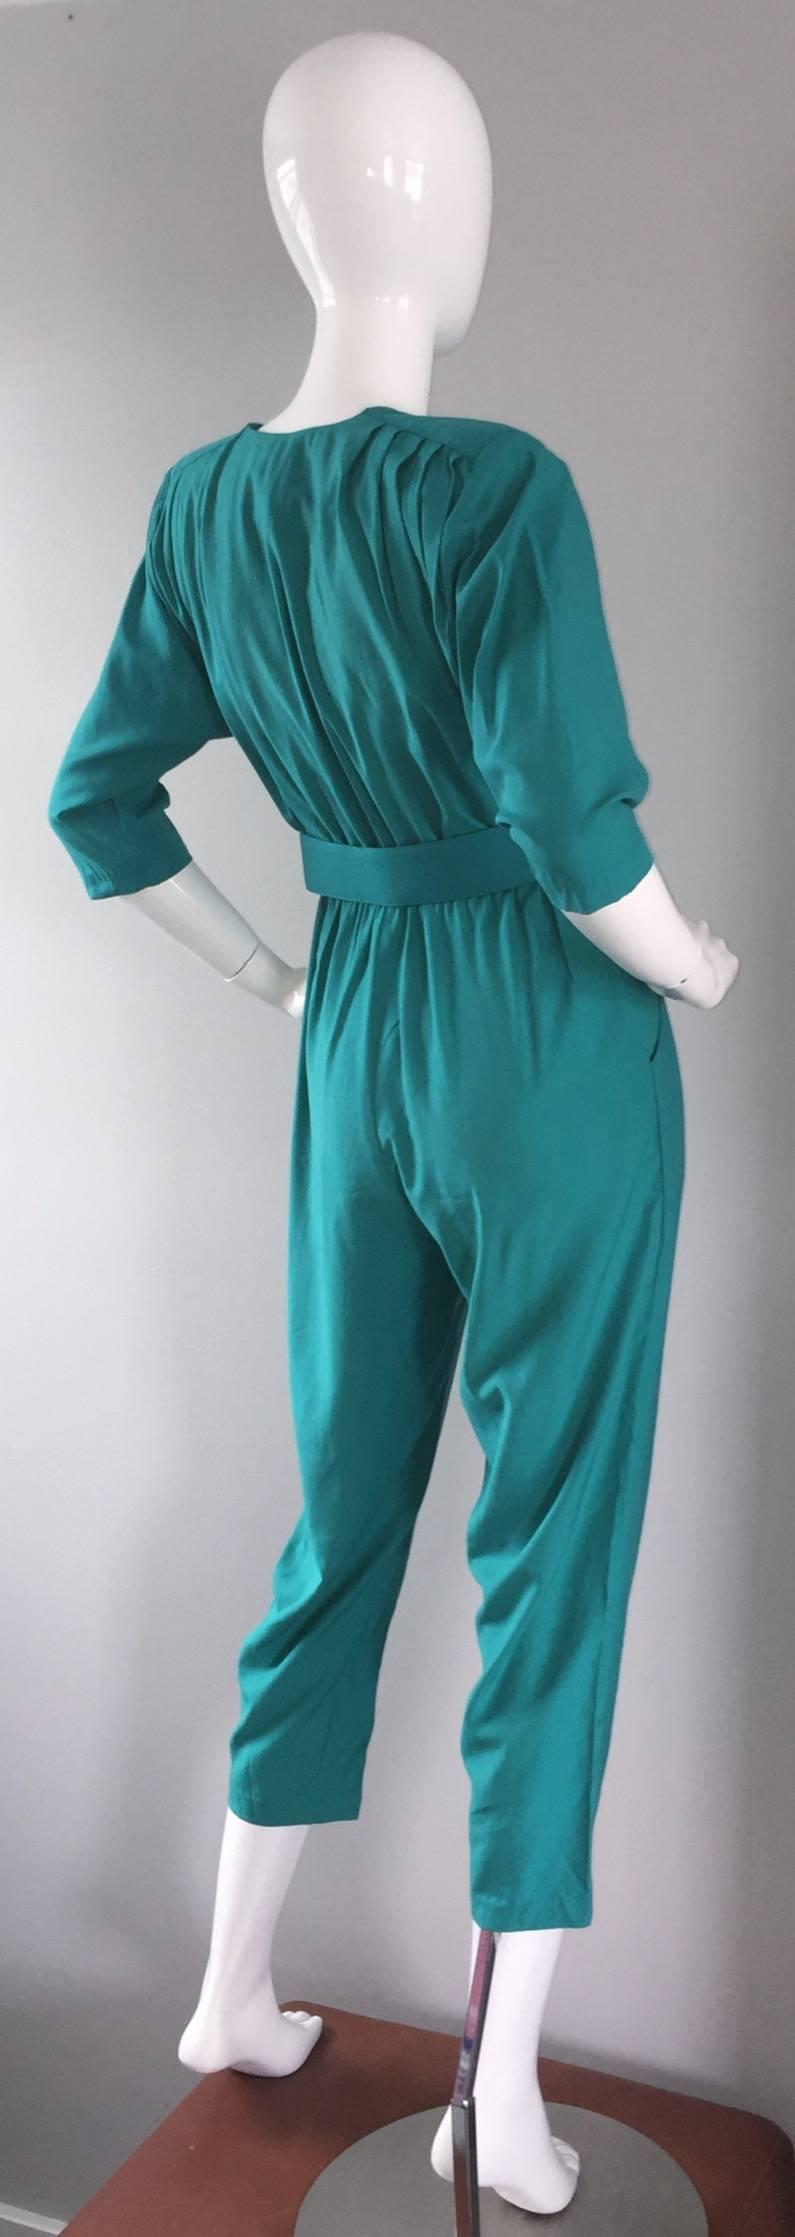 Chic 1980s teal green jumpsuit! Intricate pleating detail at shoulders. Slight dolman sleeves, to be worn by a variety of sizes. Detachable matching belt, with a large gold buckle. Perfect cropped length. 1980s does 1940s. In great condition.